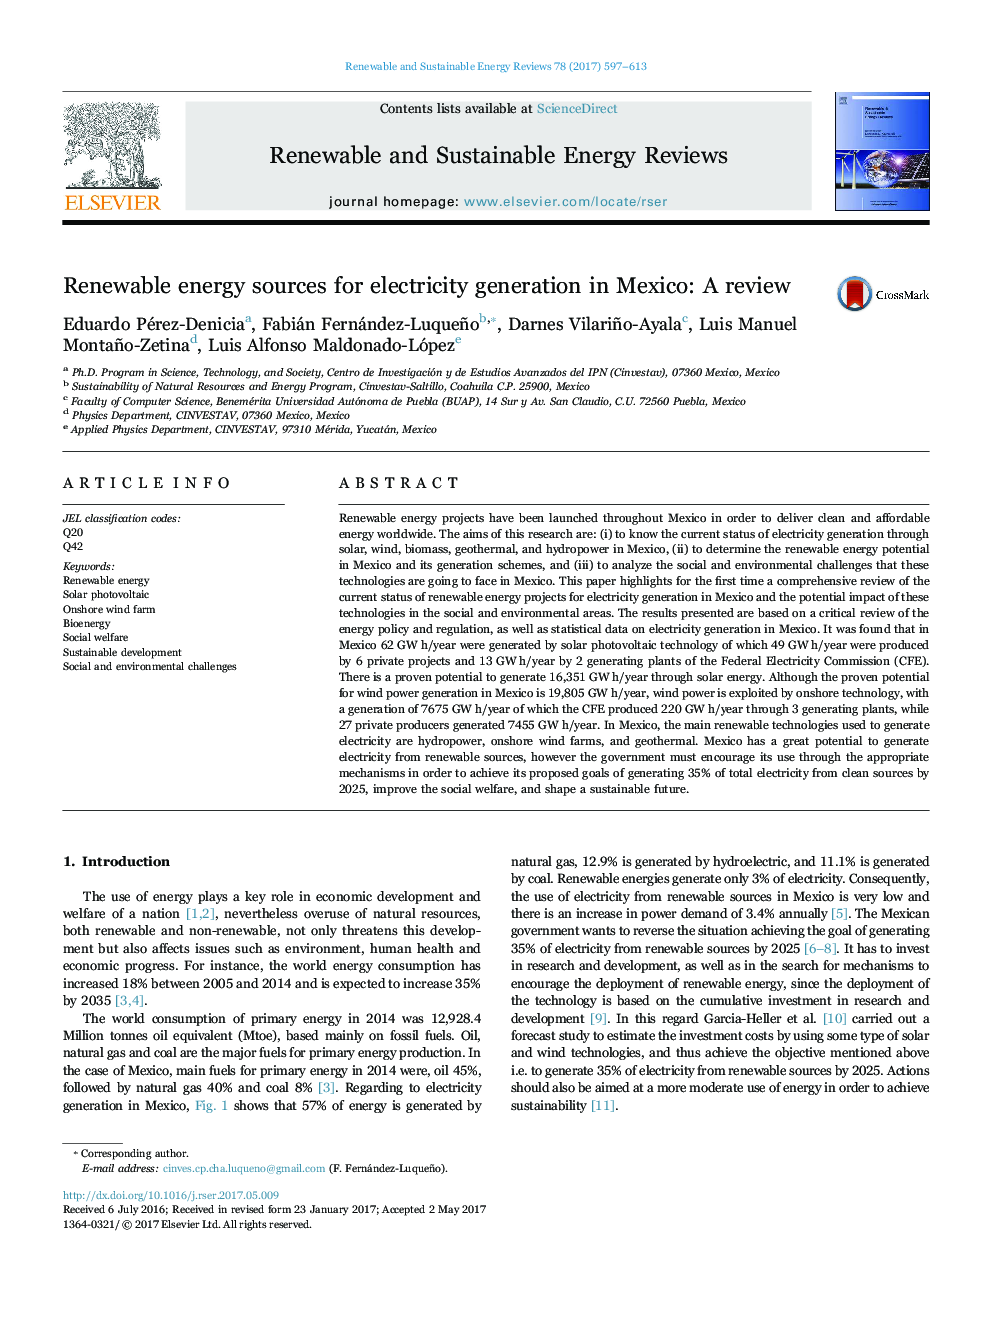 Renewable energy sources for electricity generation in Mexico: A review